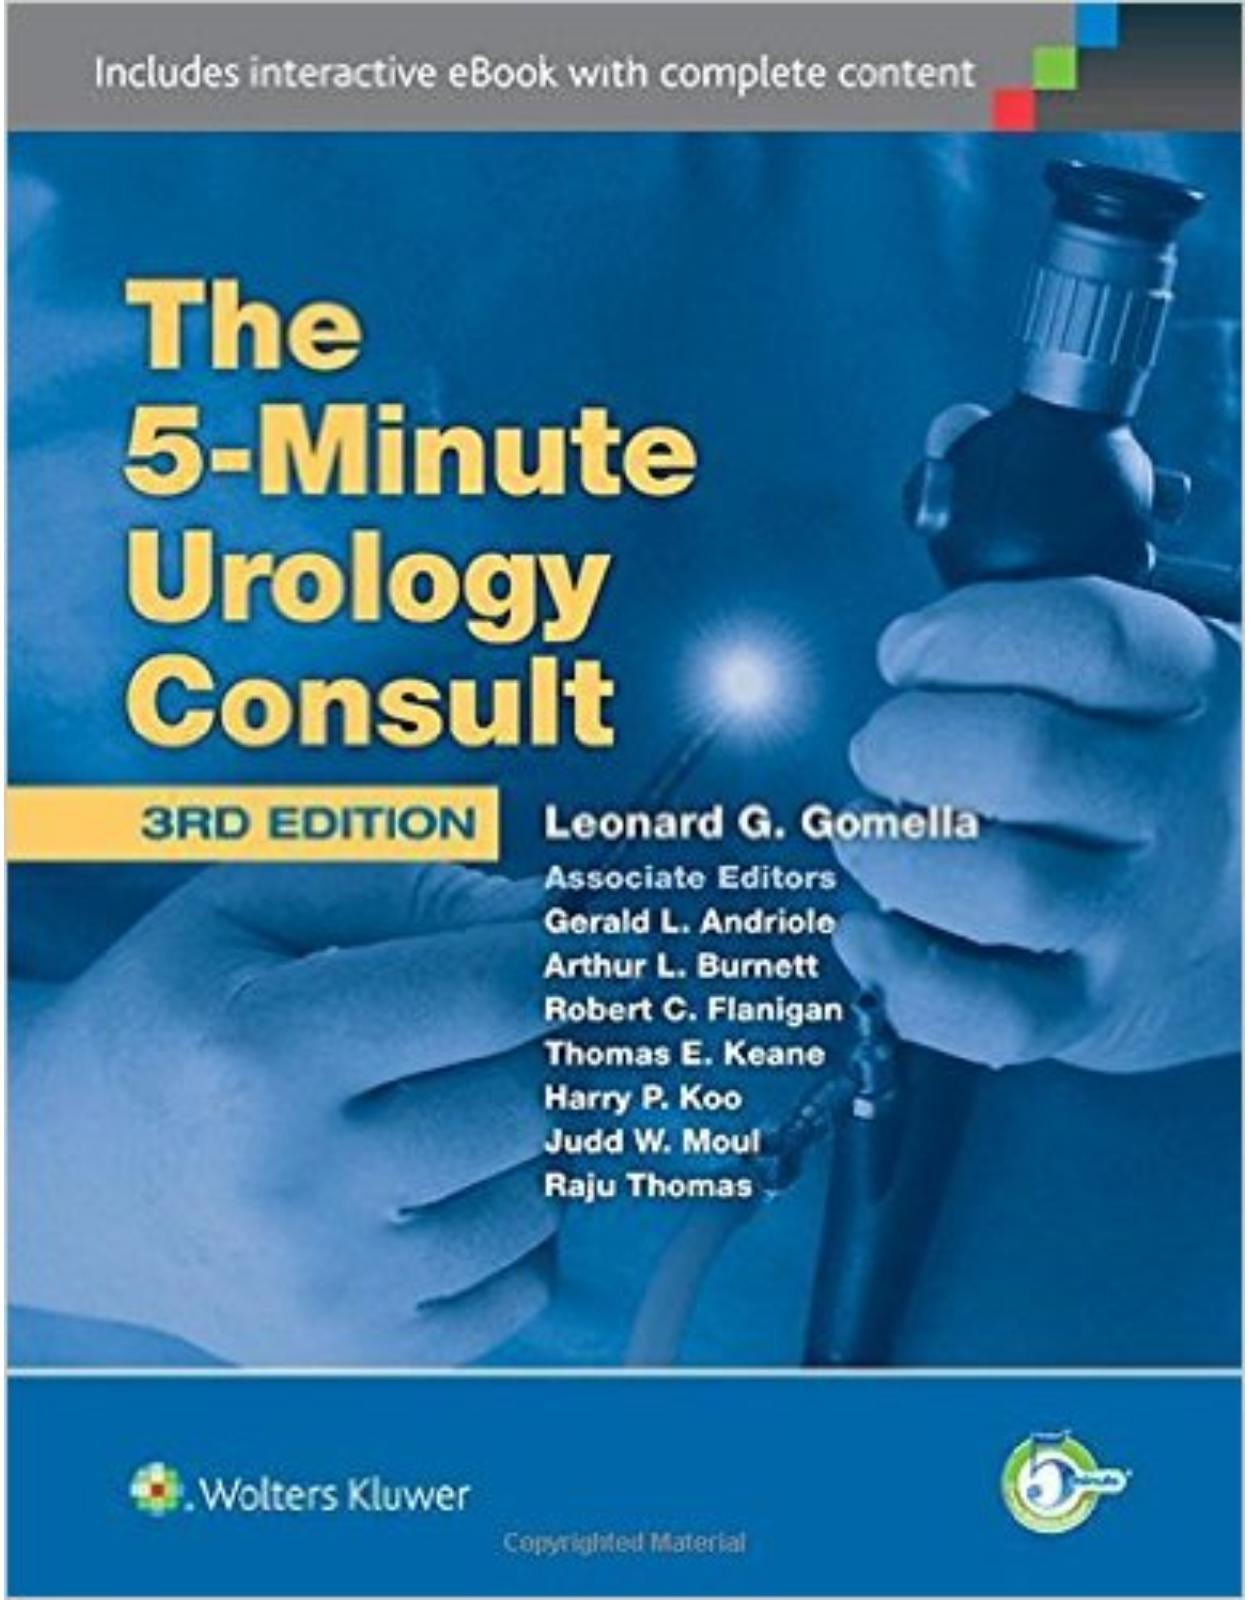 The 5 Minute Urology Consult (5-Minute Consult)